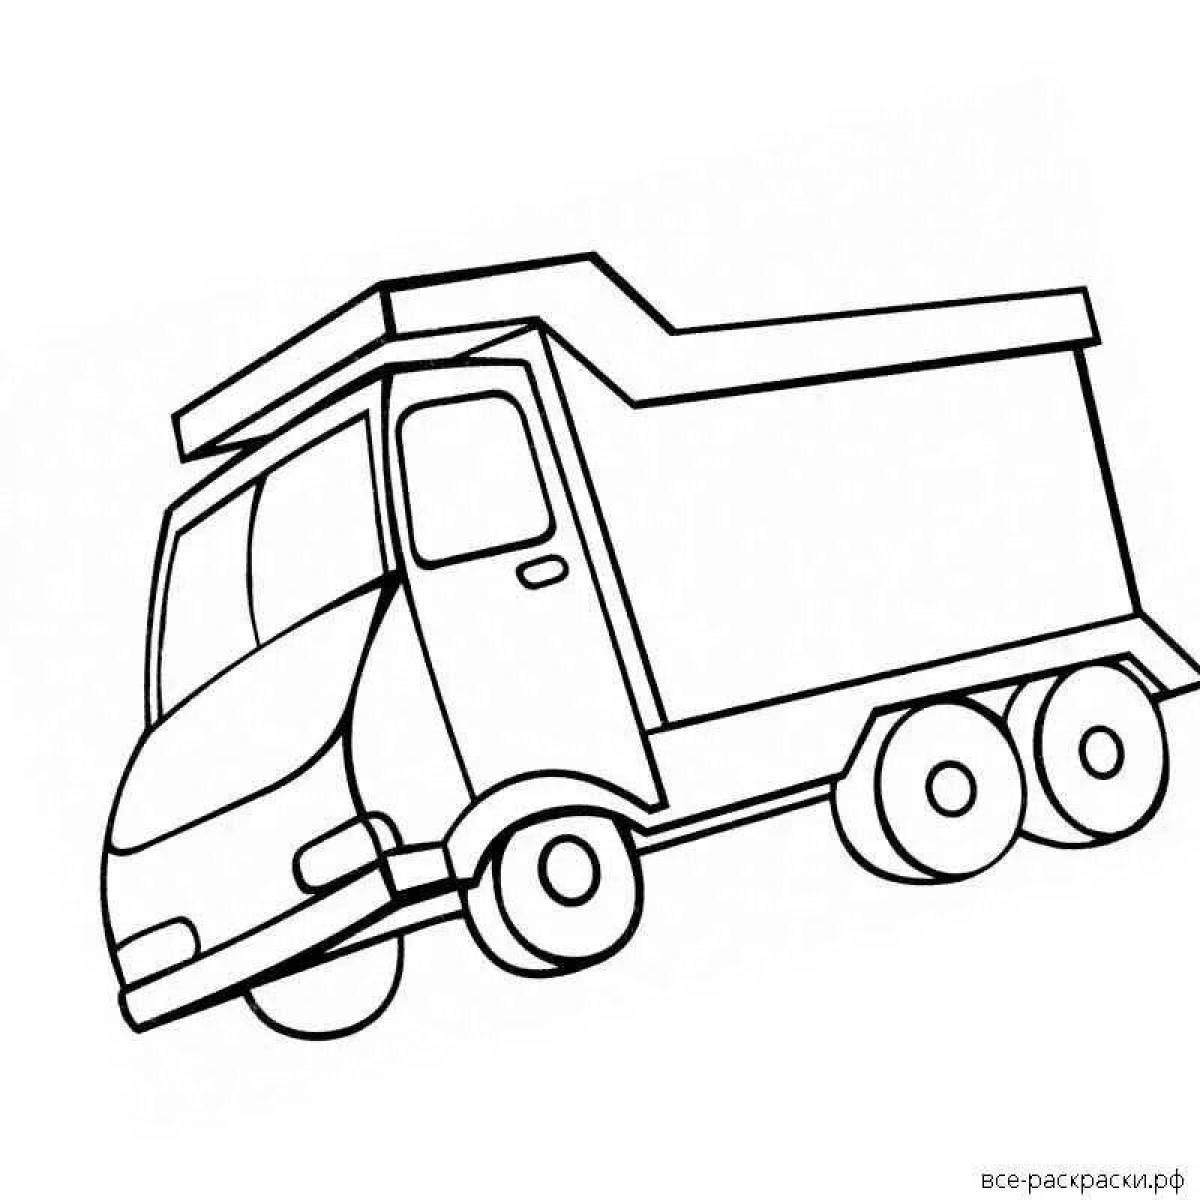 Adorable truck coloring page for 2-3 year olds